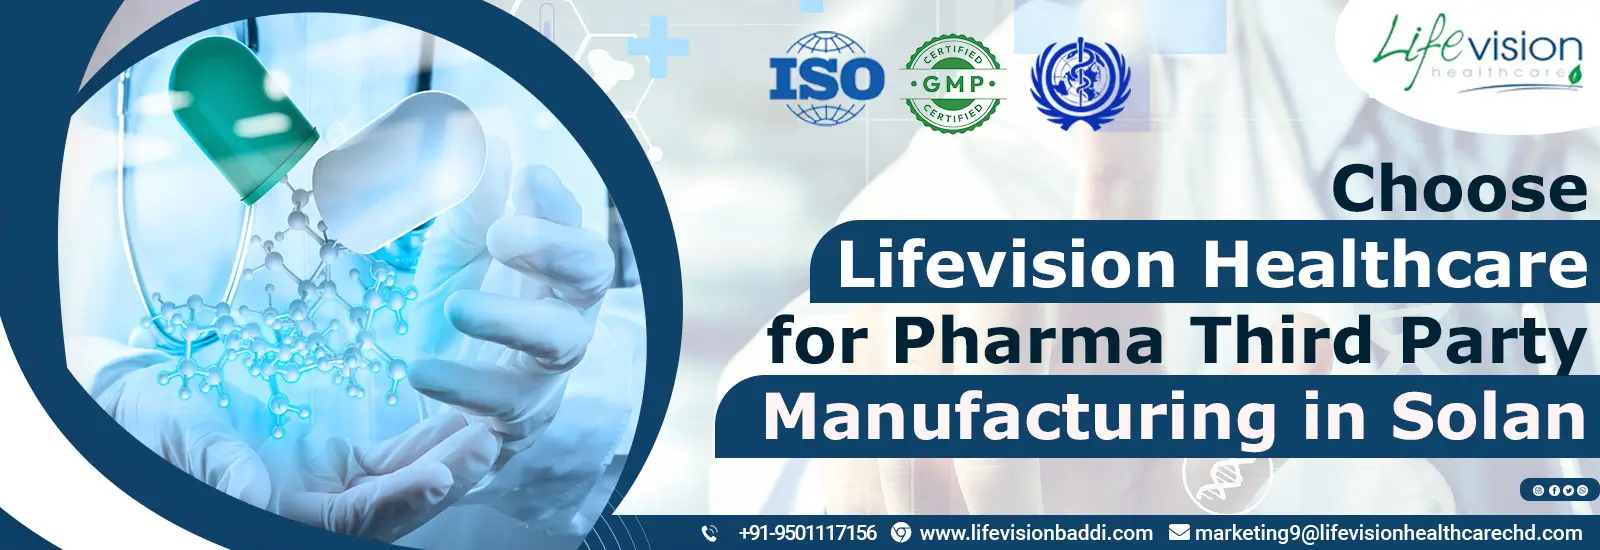 Third Party Manufacturing Pharma Companies in Solan